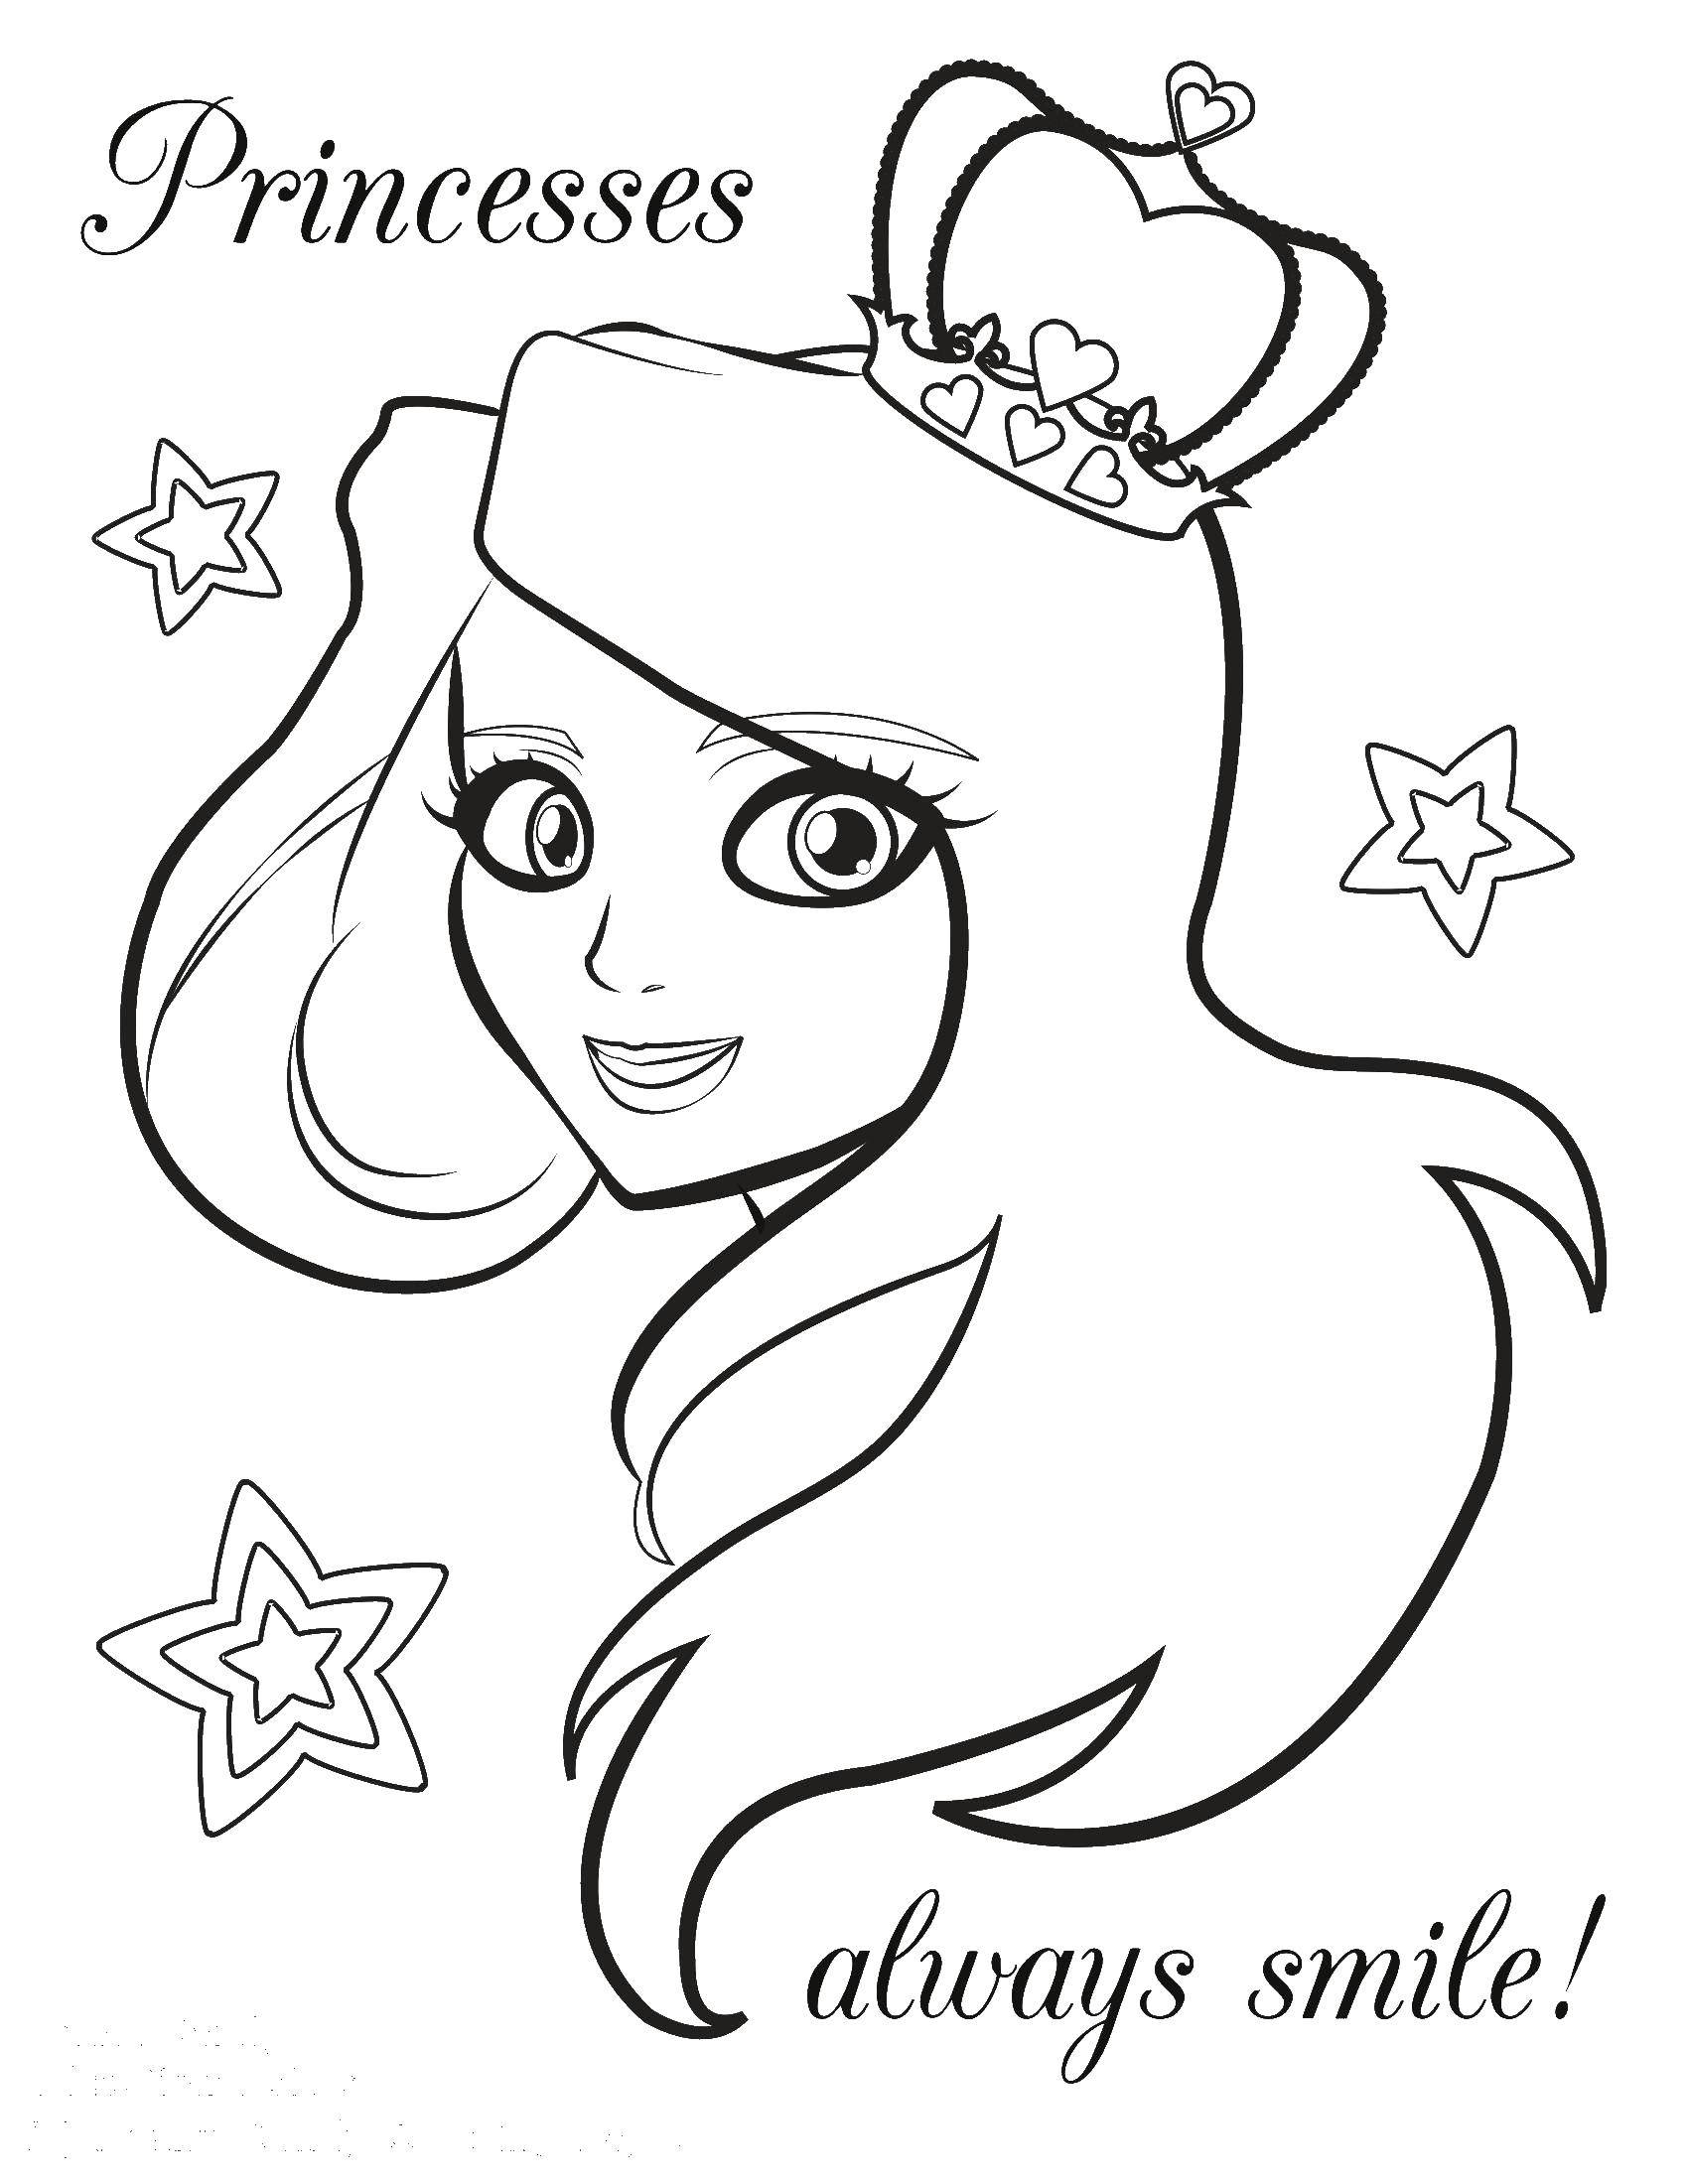 Coloring Princesses always smile. Category Coloring pages for kids. Tags:  Princess, crown.